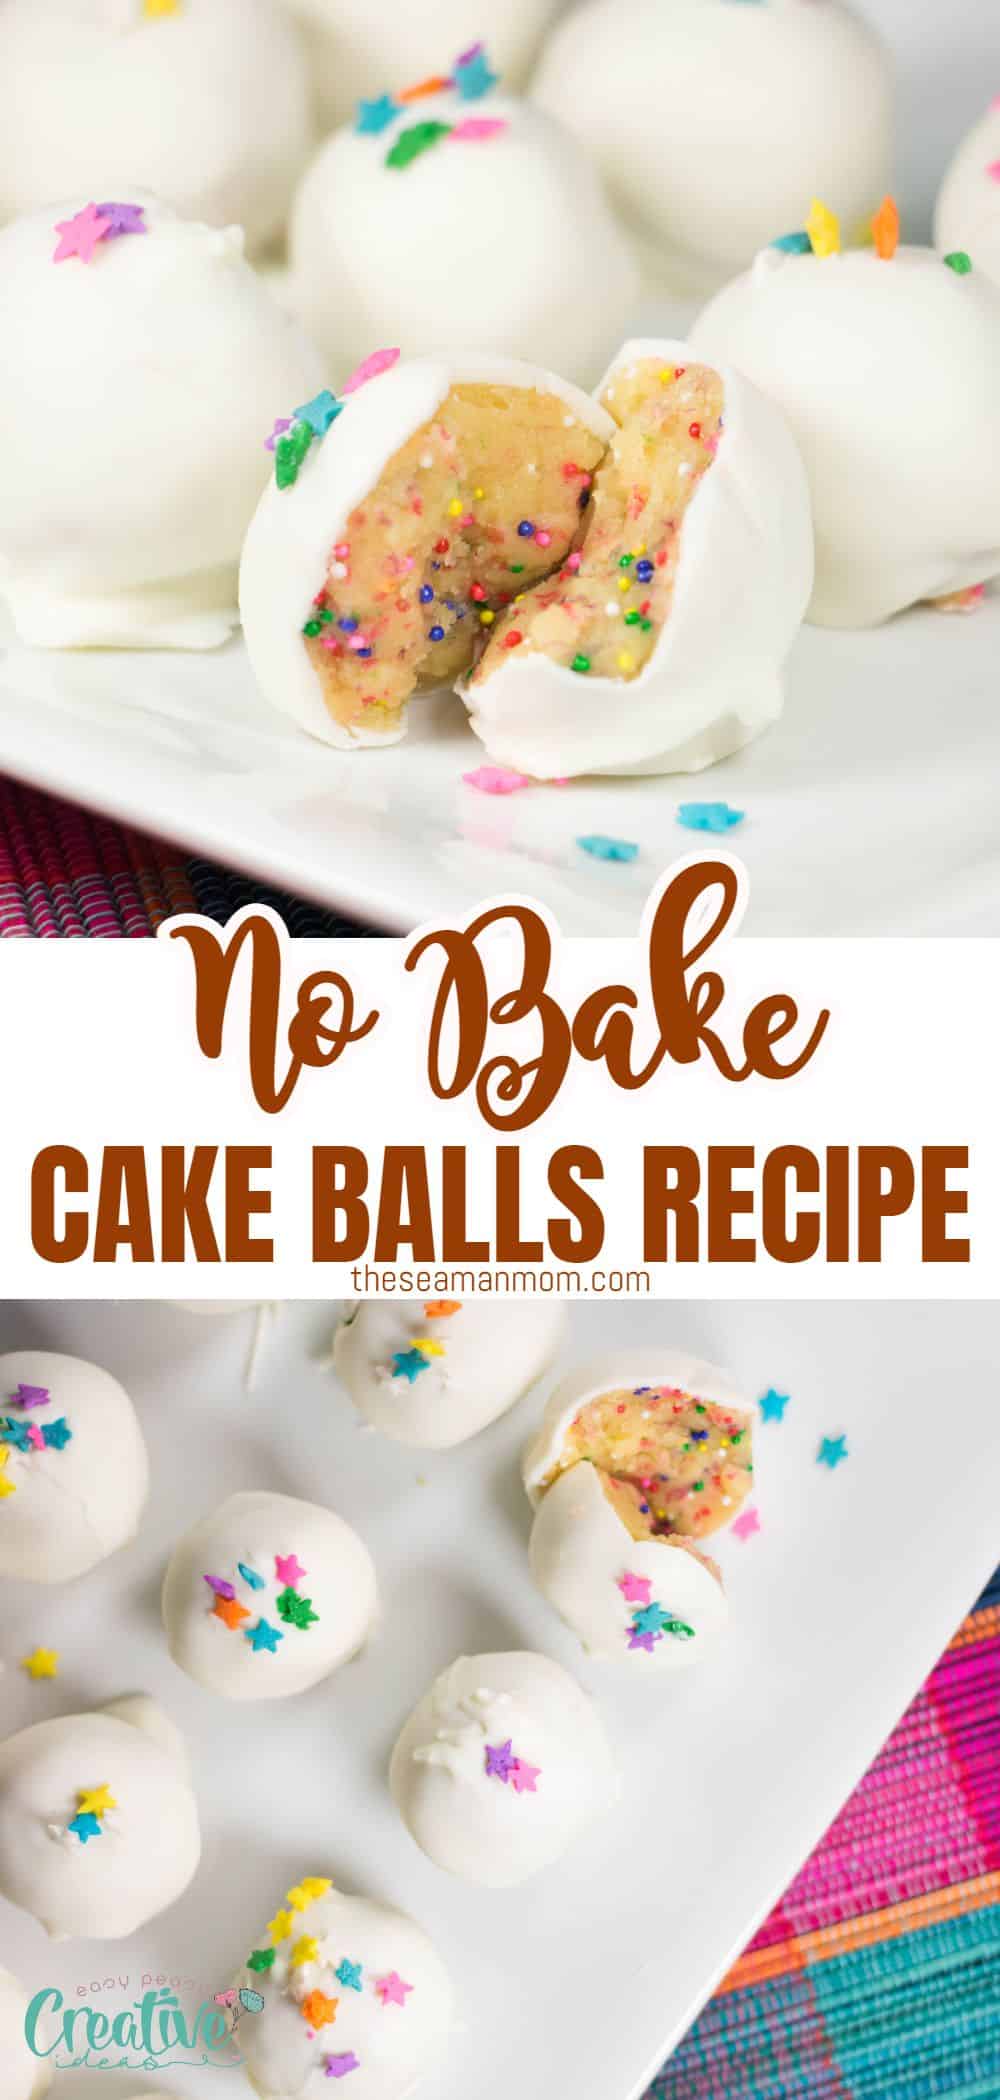 Making these delicious no-bake cake balls is a breeze and always brings smiles to the faces of everyone who tries them! These tasty treats are like miniature birthday cakes in every bite! Give them a try today and you won't be disappointed. via @petroneagu